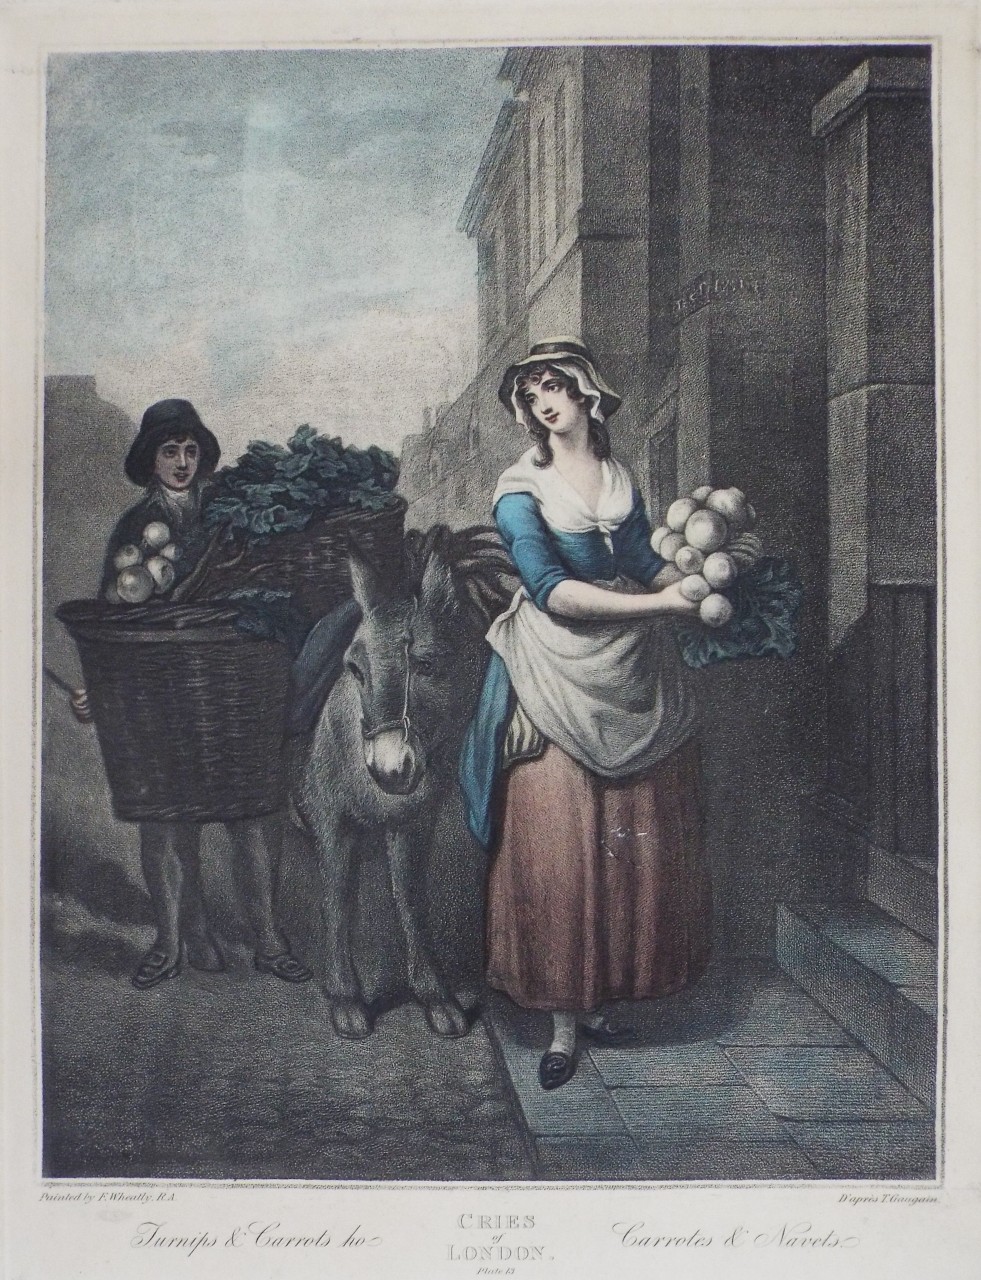 Lithograph - Cries of London Plate 13: Turnips & Carrots ho.
Carrotes & Navets. - Gaugain